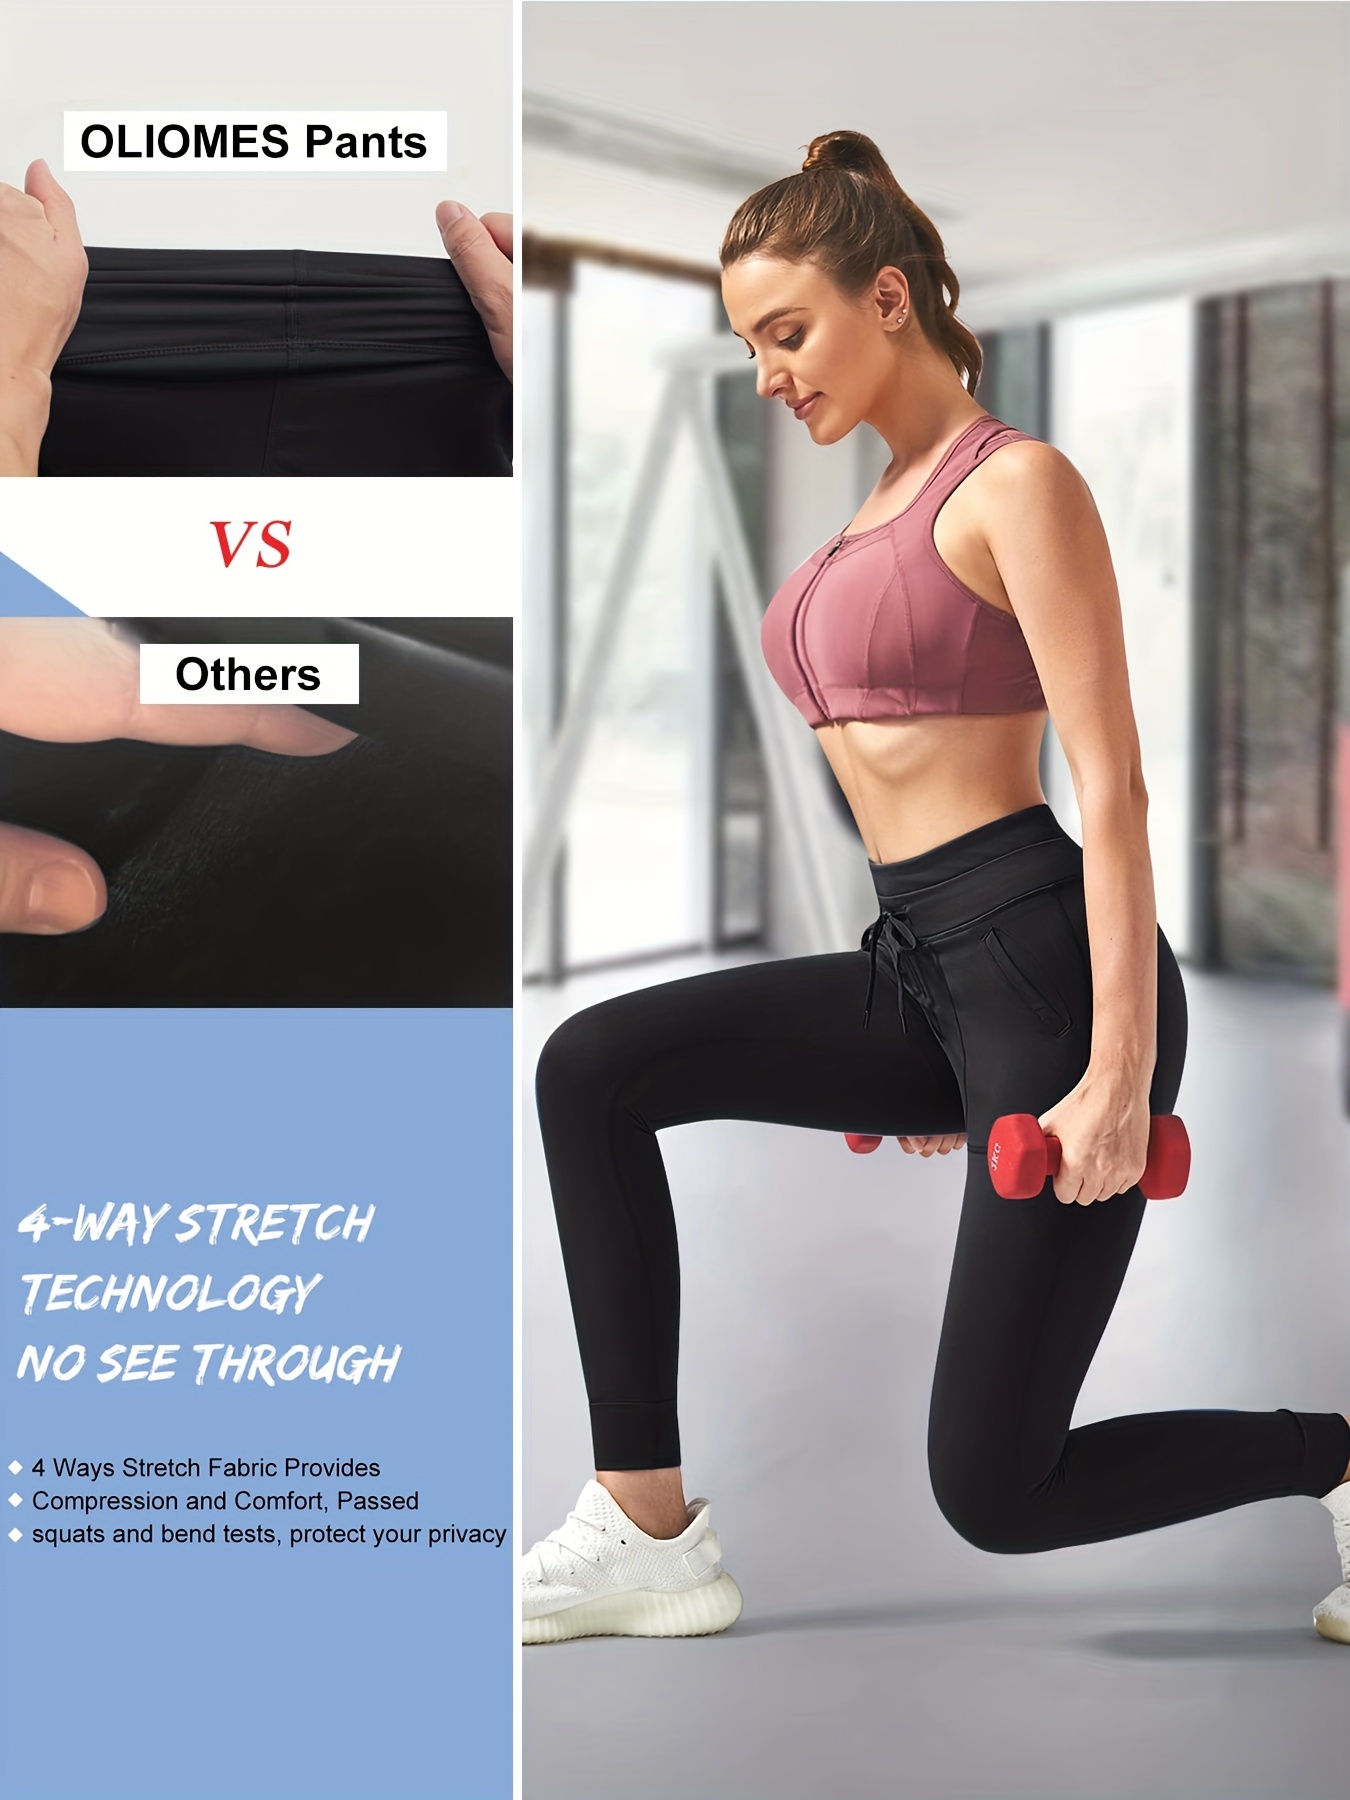 Womens High Waisted Leggings Stretch Tummy Control Workout Running Yoga  Pants Non See-through Yoga Pants 